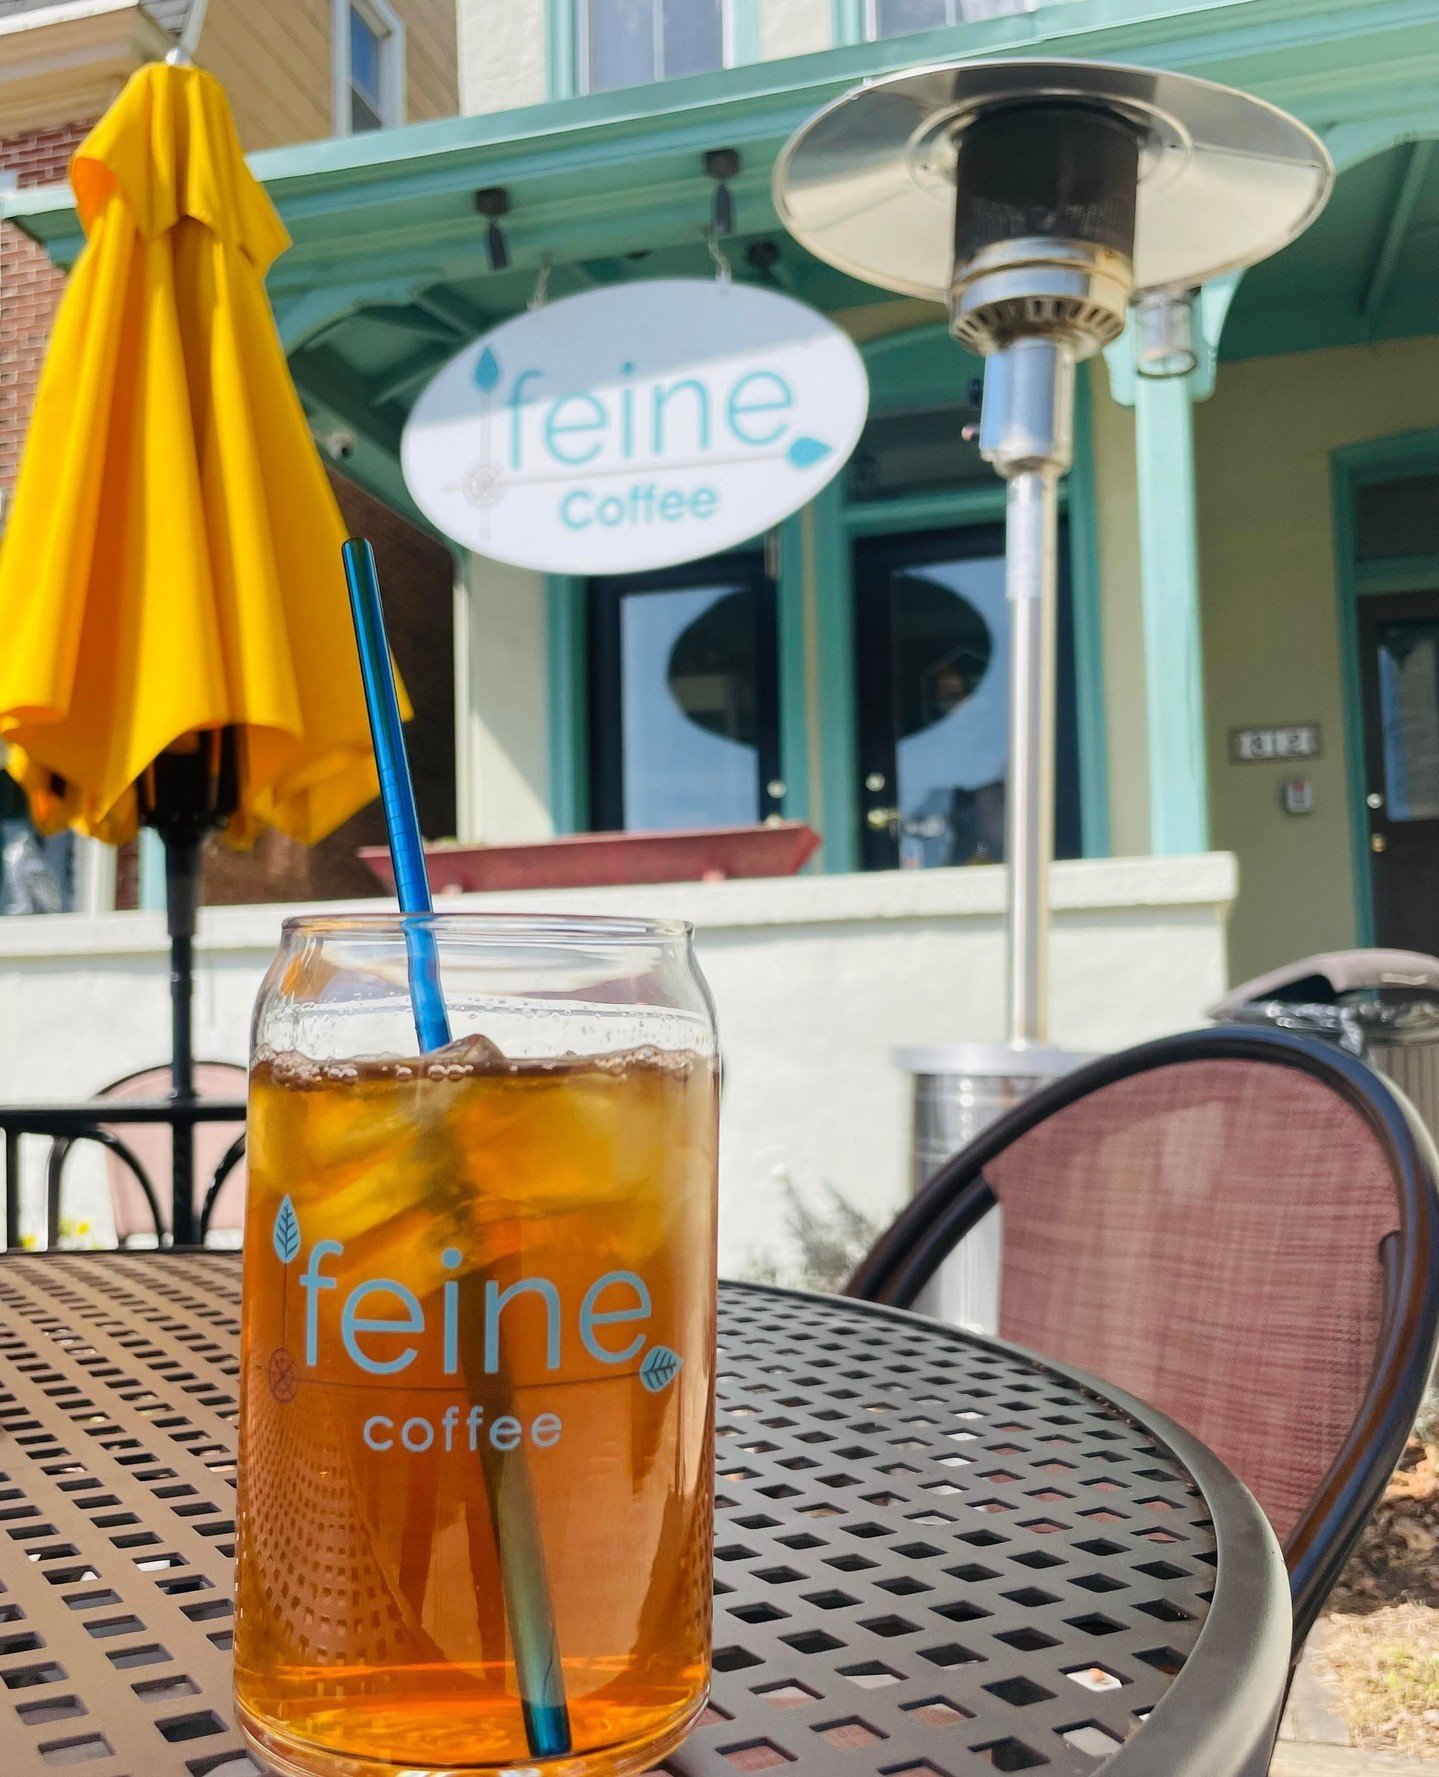 We have the cutest metallic straws and mason jars for sale! Rep Feine wherever you go and stop by for your favorite iced drink!⁠
⁠
#drinkfeine #coffee #icedtea #metalstraw ⁠
#espresso #specialtycoffee #coffeelover #coffeeshop